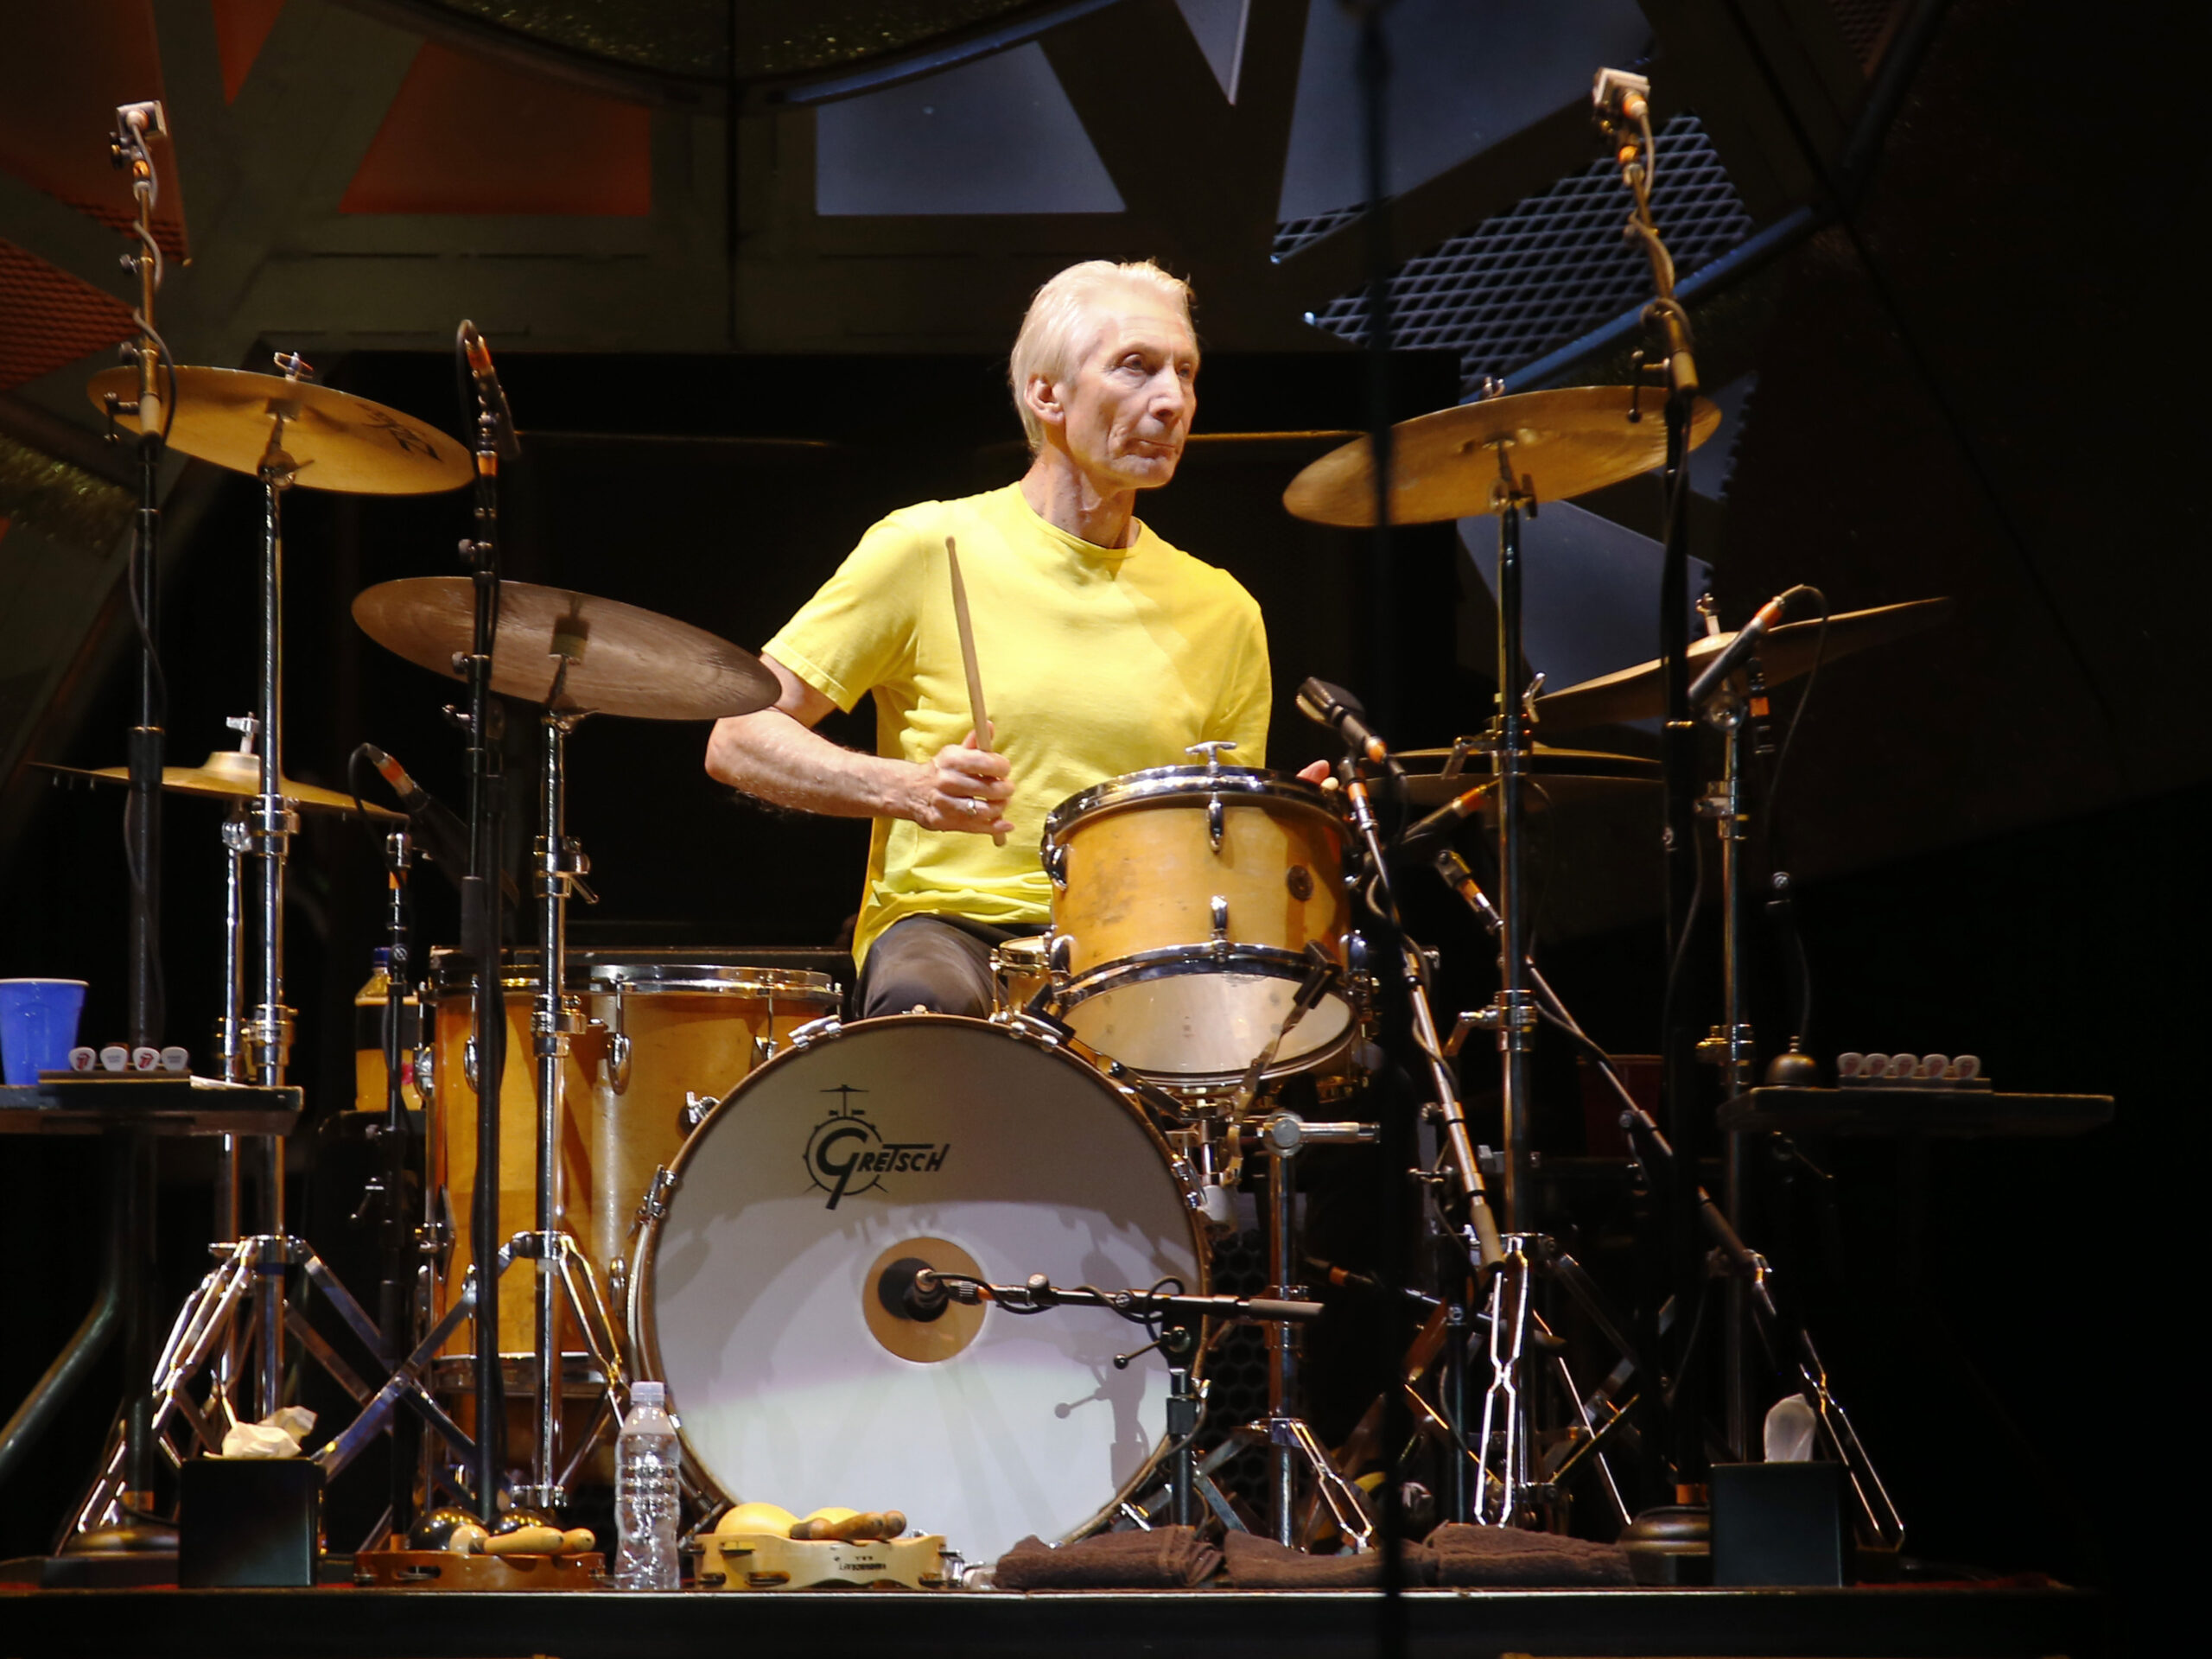 Featured image for “Rolling Stones Drummer Charlie Watts Dies At 80”